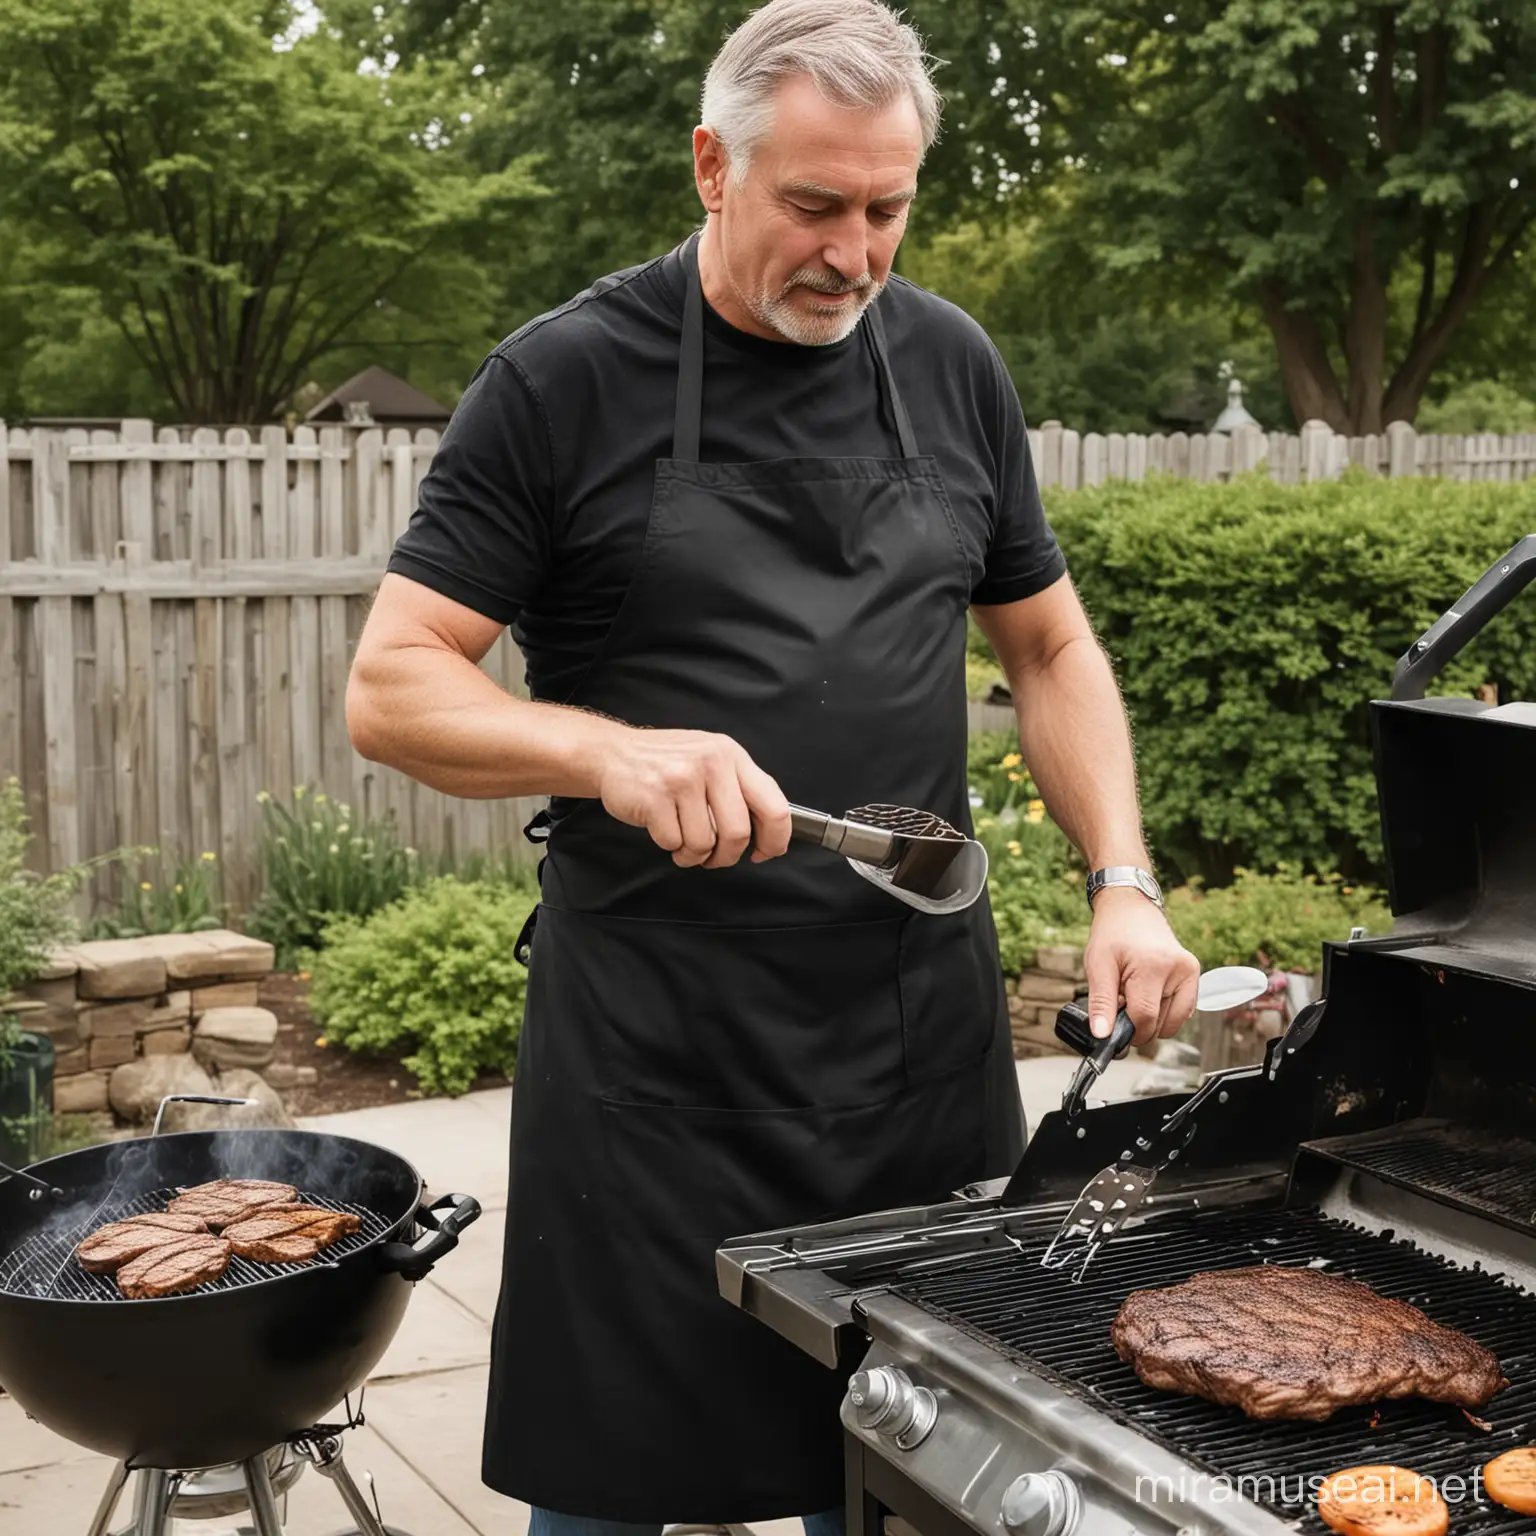 60 years old dad grilling, using a black apron, and a black watch,